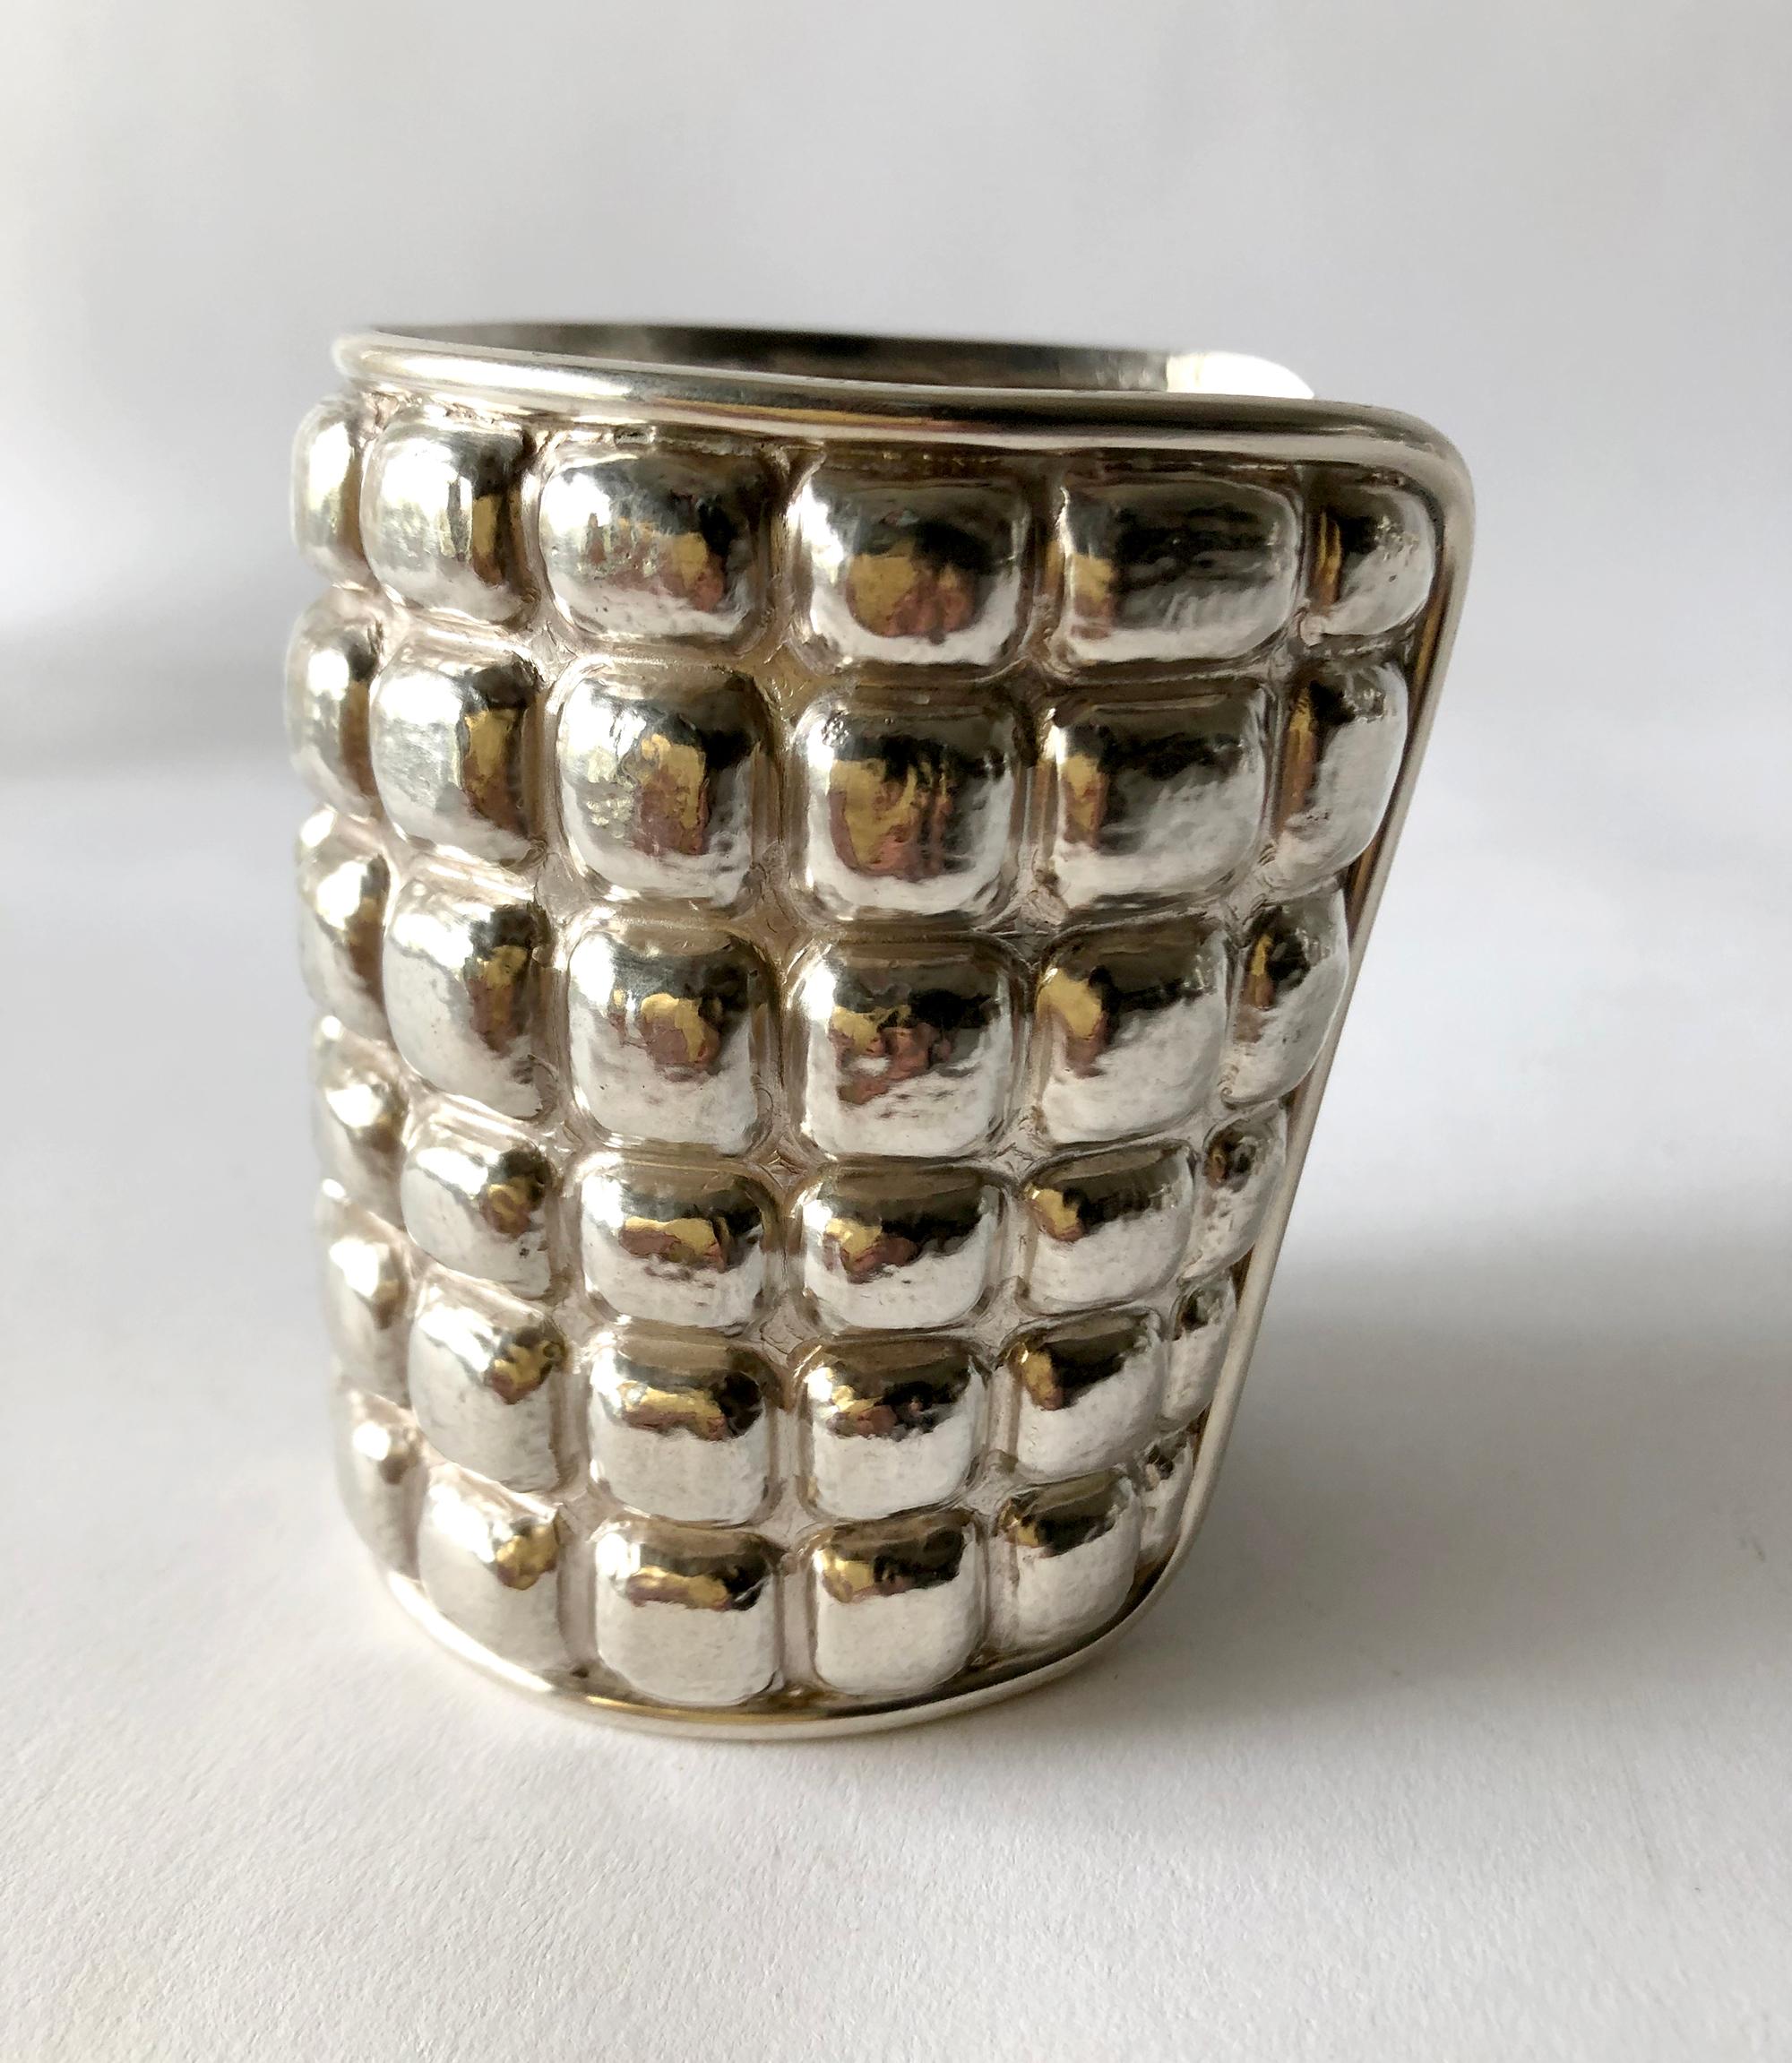 Important hand made sterling silver cuff bracelet with repousse´ waffle design created by architect and jeweler Graziella Laffi of Lima, Peru.  Cuff measures 9